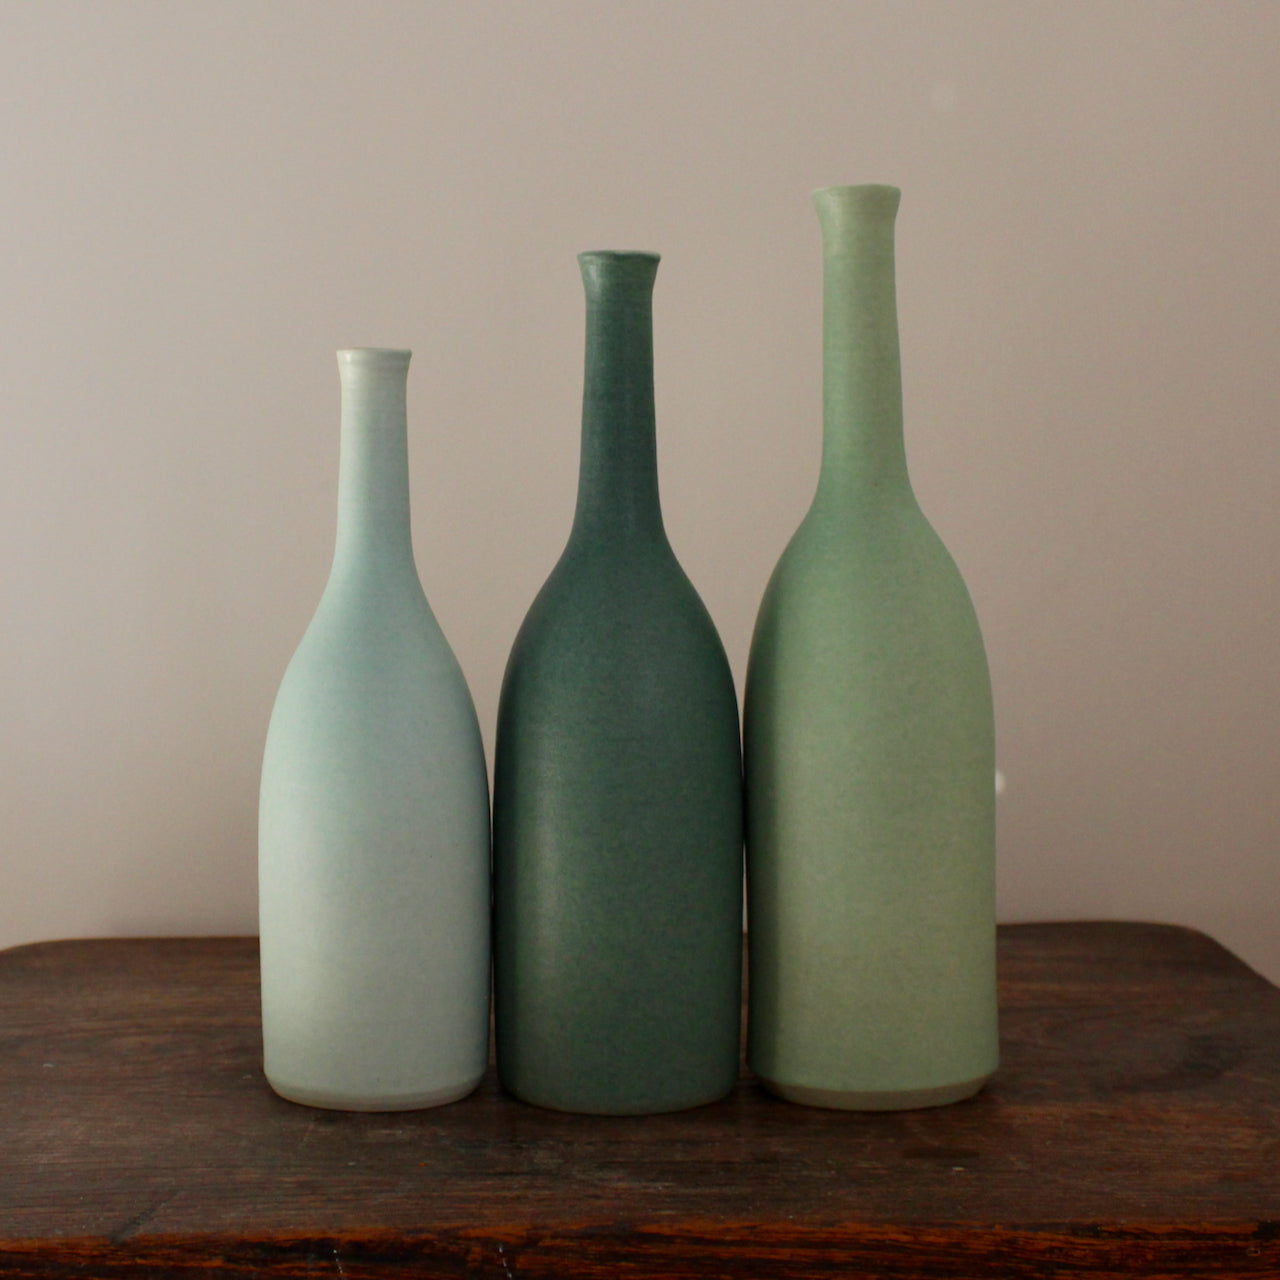 three ceramic bottles in different shades of turquoise and incremental sizes by UK ceramicist Lucy Burley 